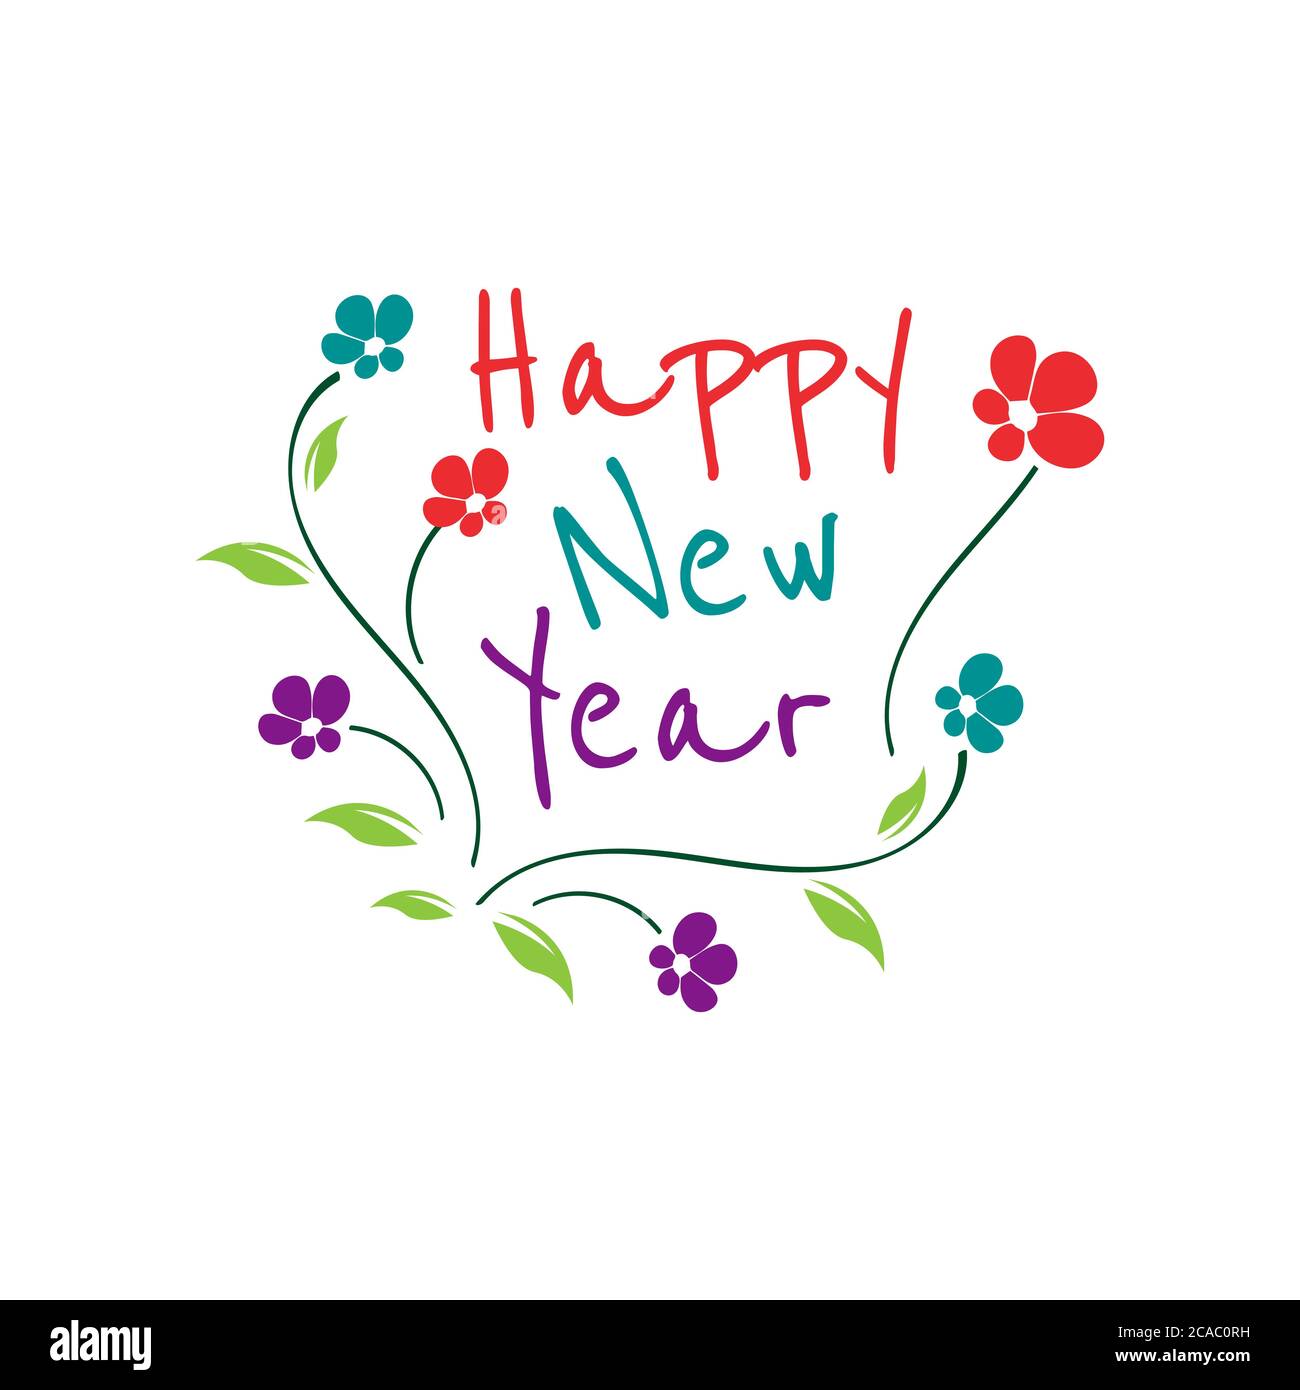 Happy New Year 2020 on White Background. gretting card with floral ...